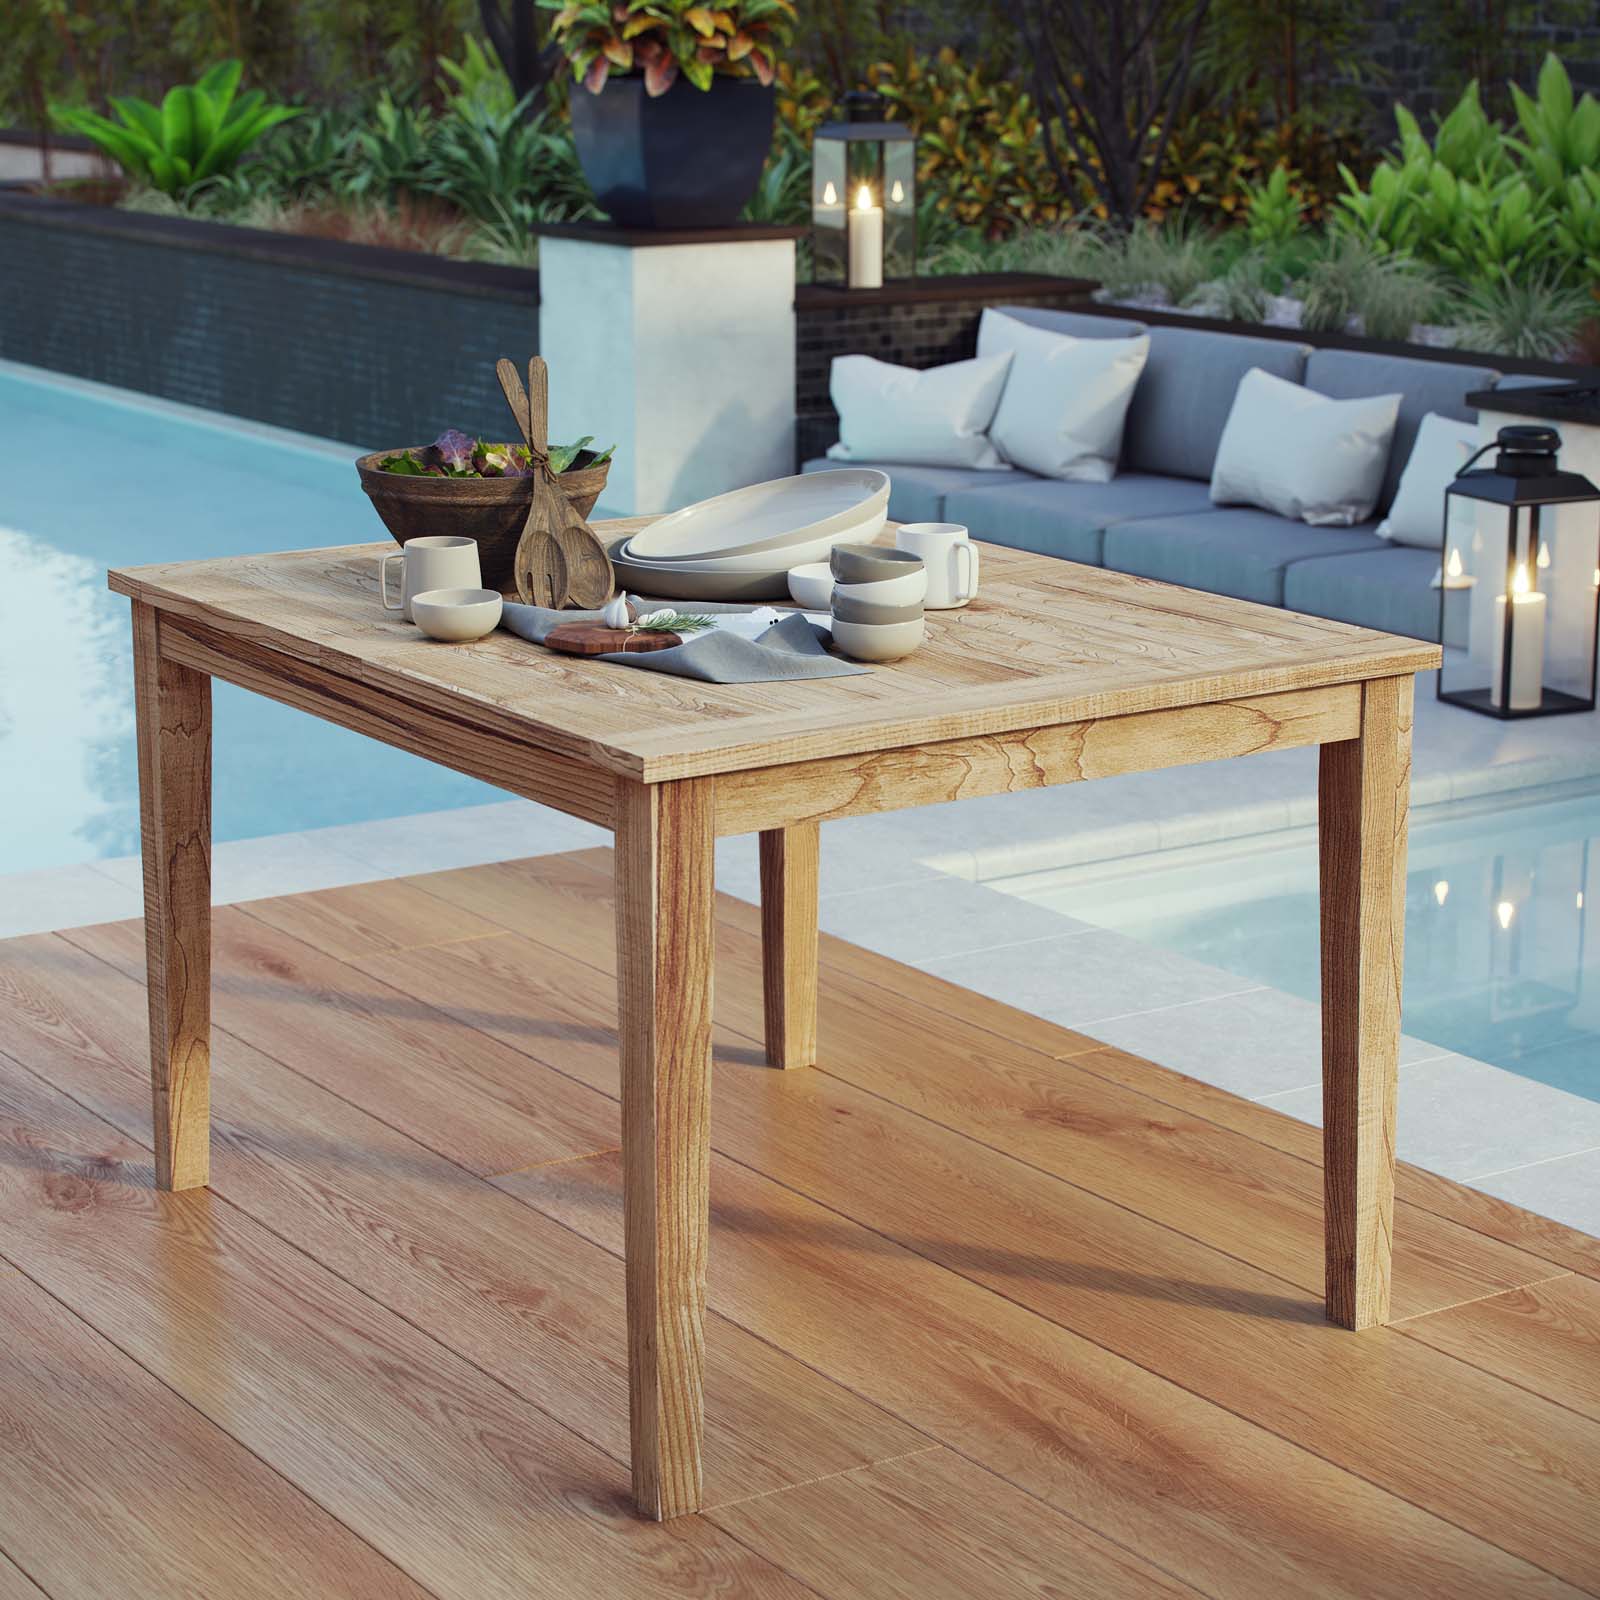 Enjoy Outdoor Dining With Teak Patio Coffee Tables